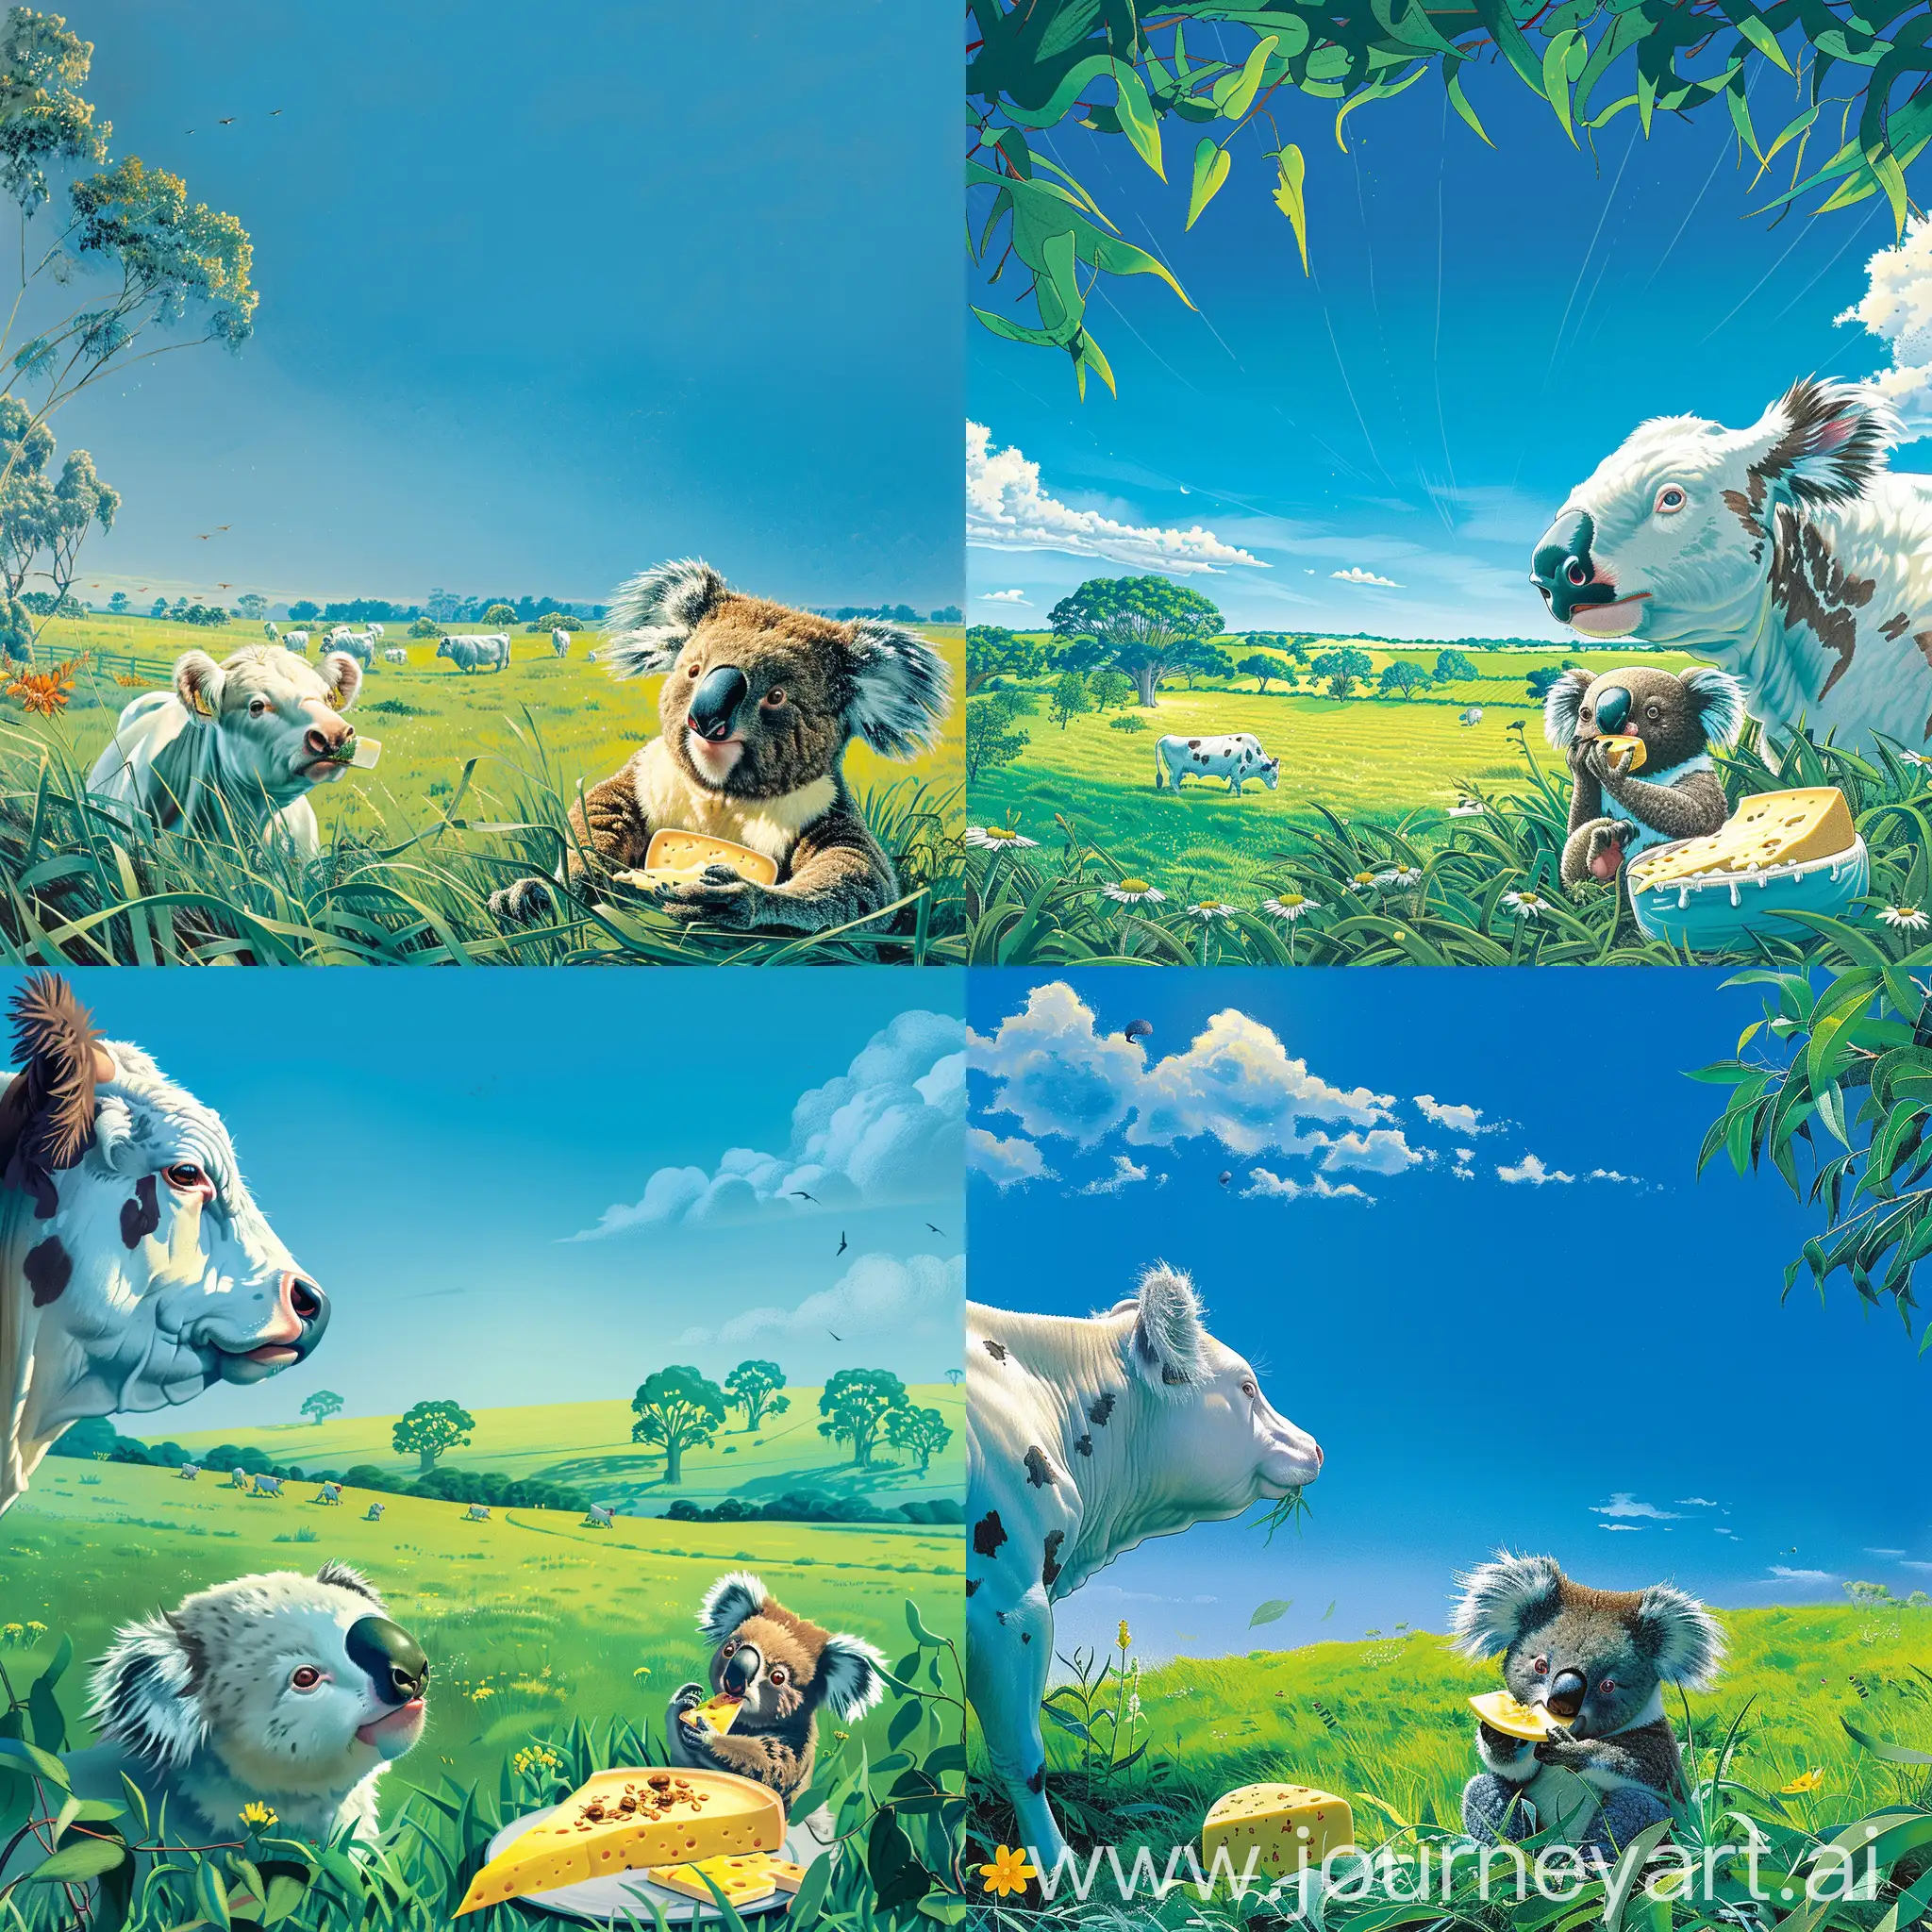 Background:  The cover depicts a picturesque scene of the Australian countryside. A clear blue sky stretches overhead, framing a lush green grass field. In the foreground, a contented Holstein Friesian cow grazes peacefully, symbolizing the source of our premium dairy products.  Foreground:  Amidst the grass, an iconic Australian koala is depicted enjoying a slice of cheese, showcasing the unique flavors and ingredients that define our dairy offerings.